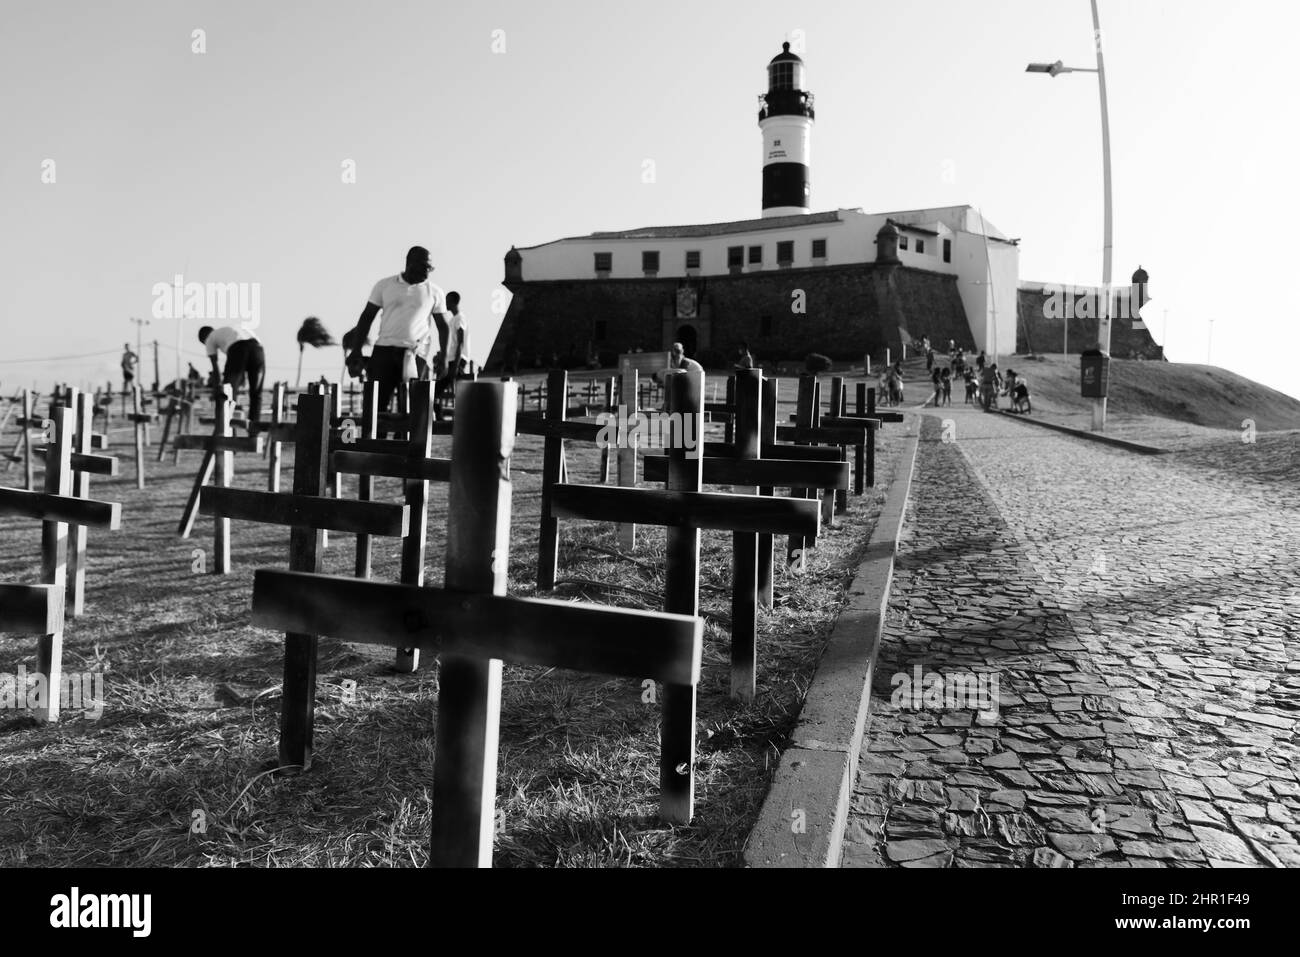 Crosses fixed to the ground in honor of those killed by Covid-19 at Farol da Barra in Salvador, Bahia, Bra Stock Photo